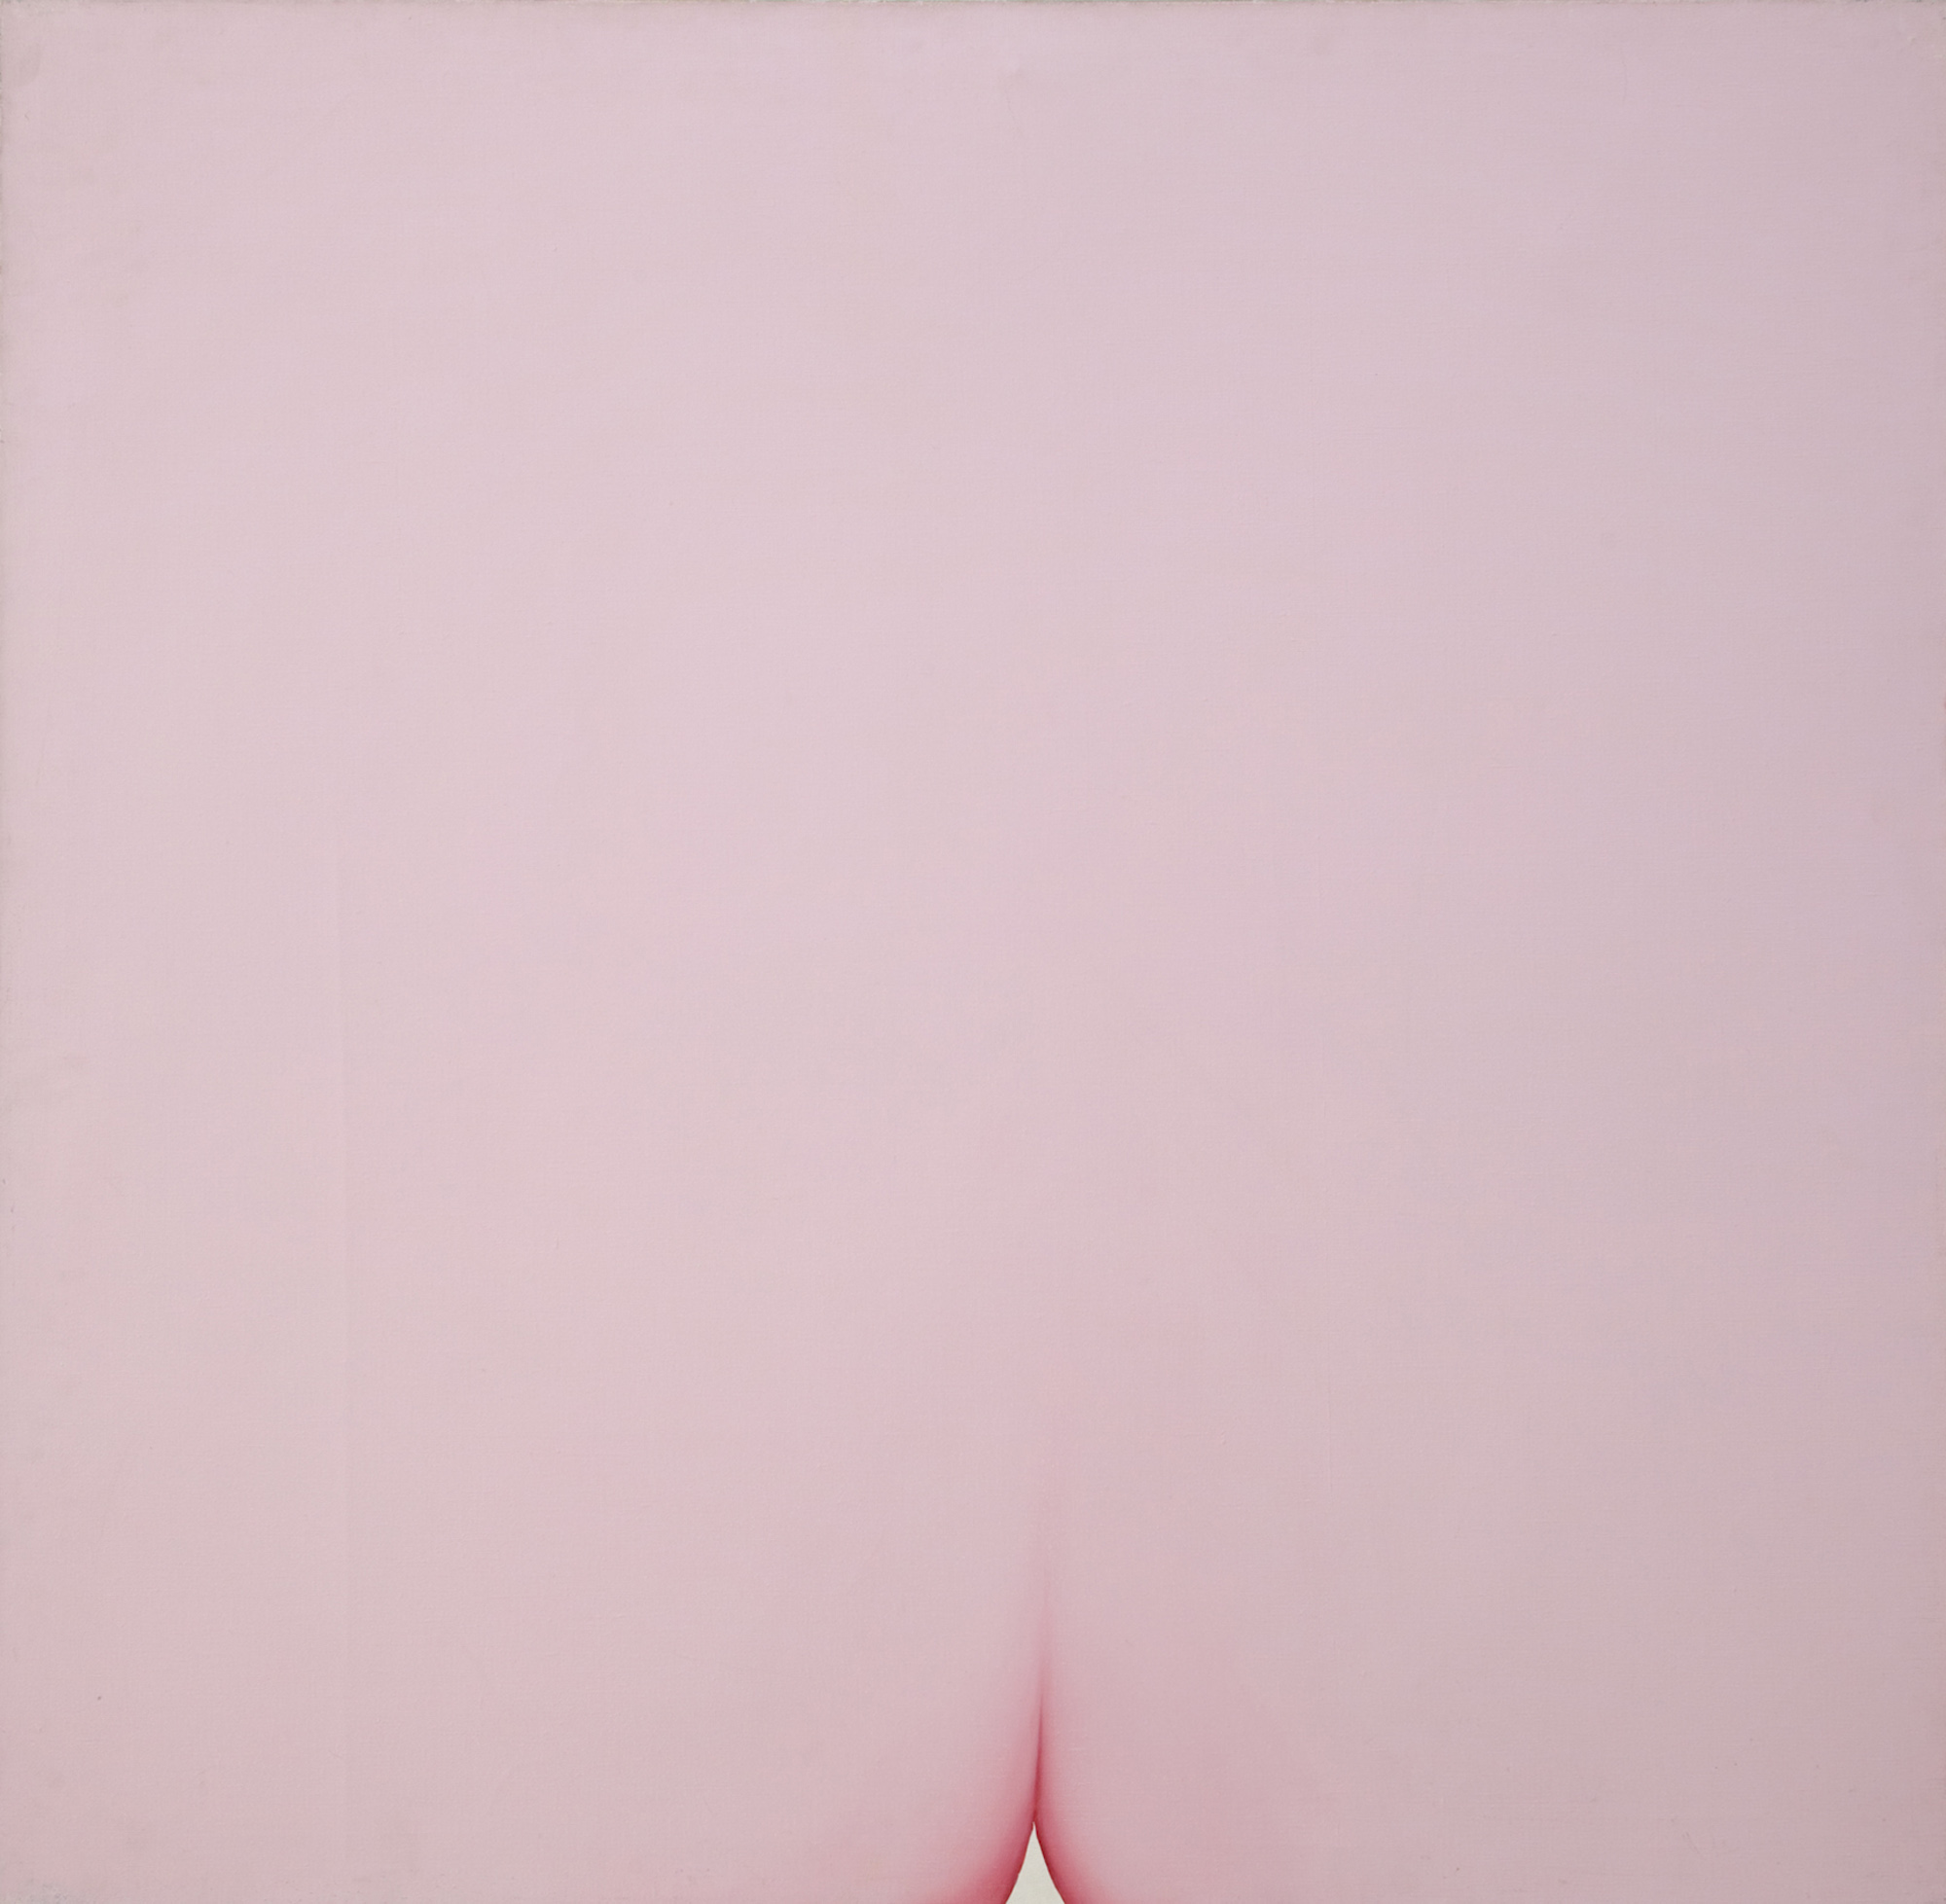 a pink posterior